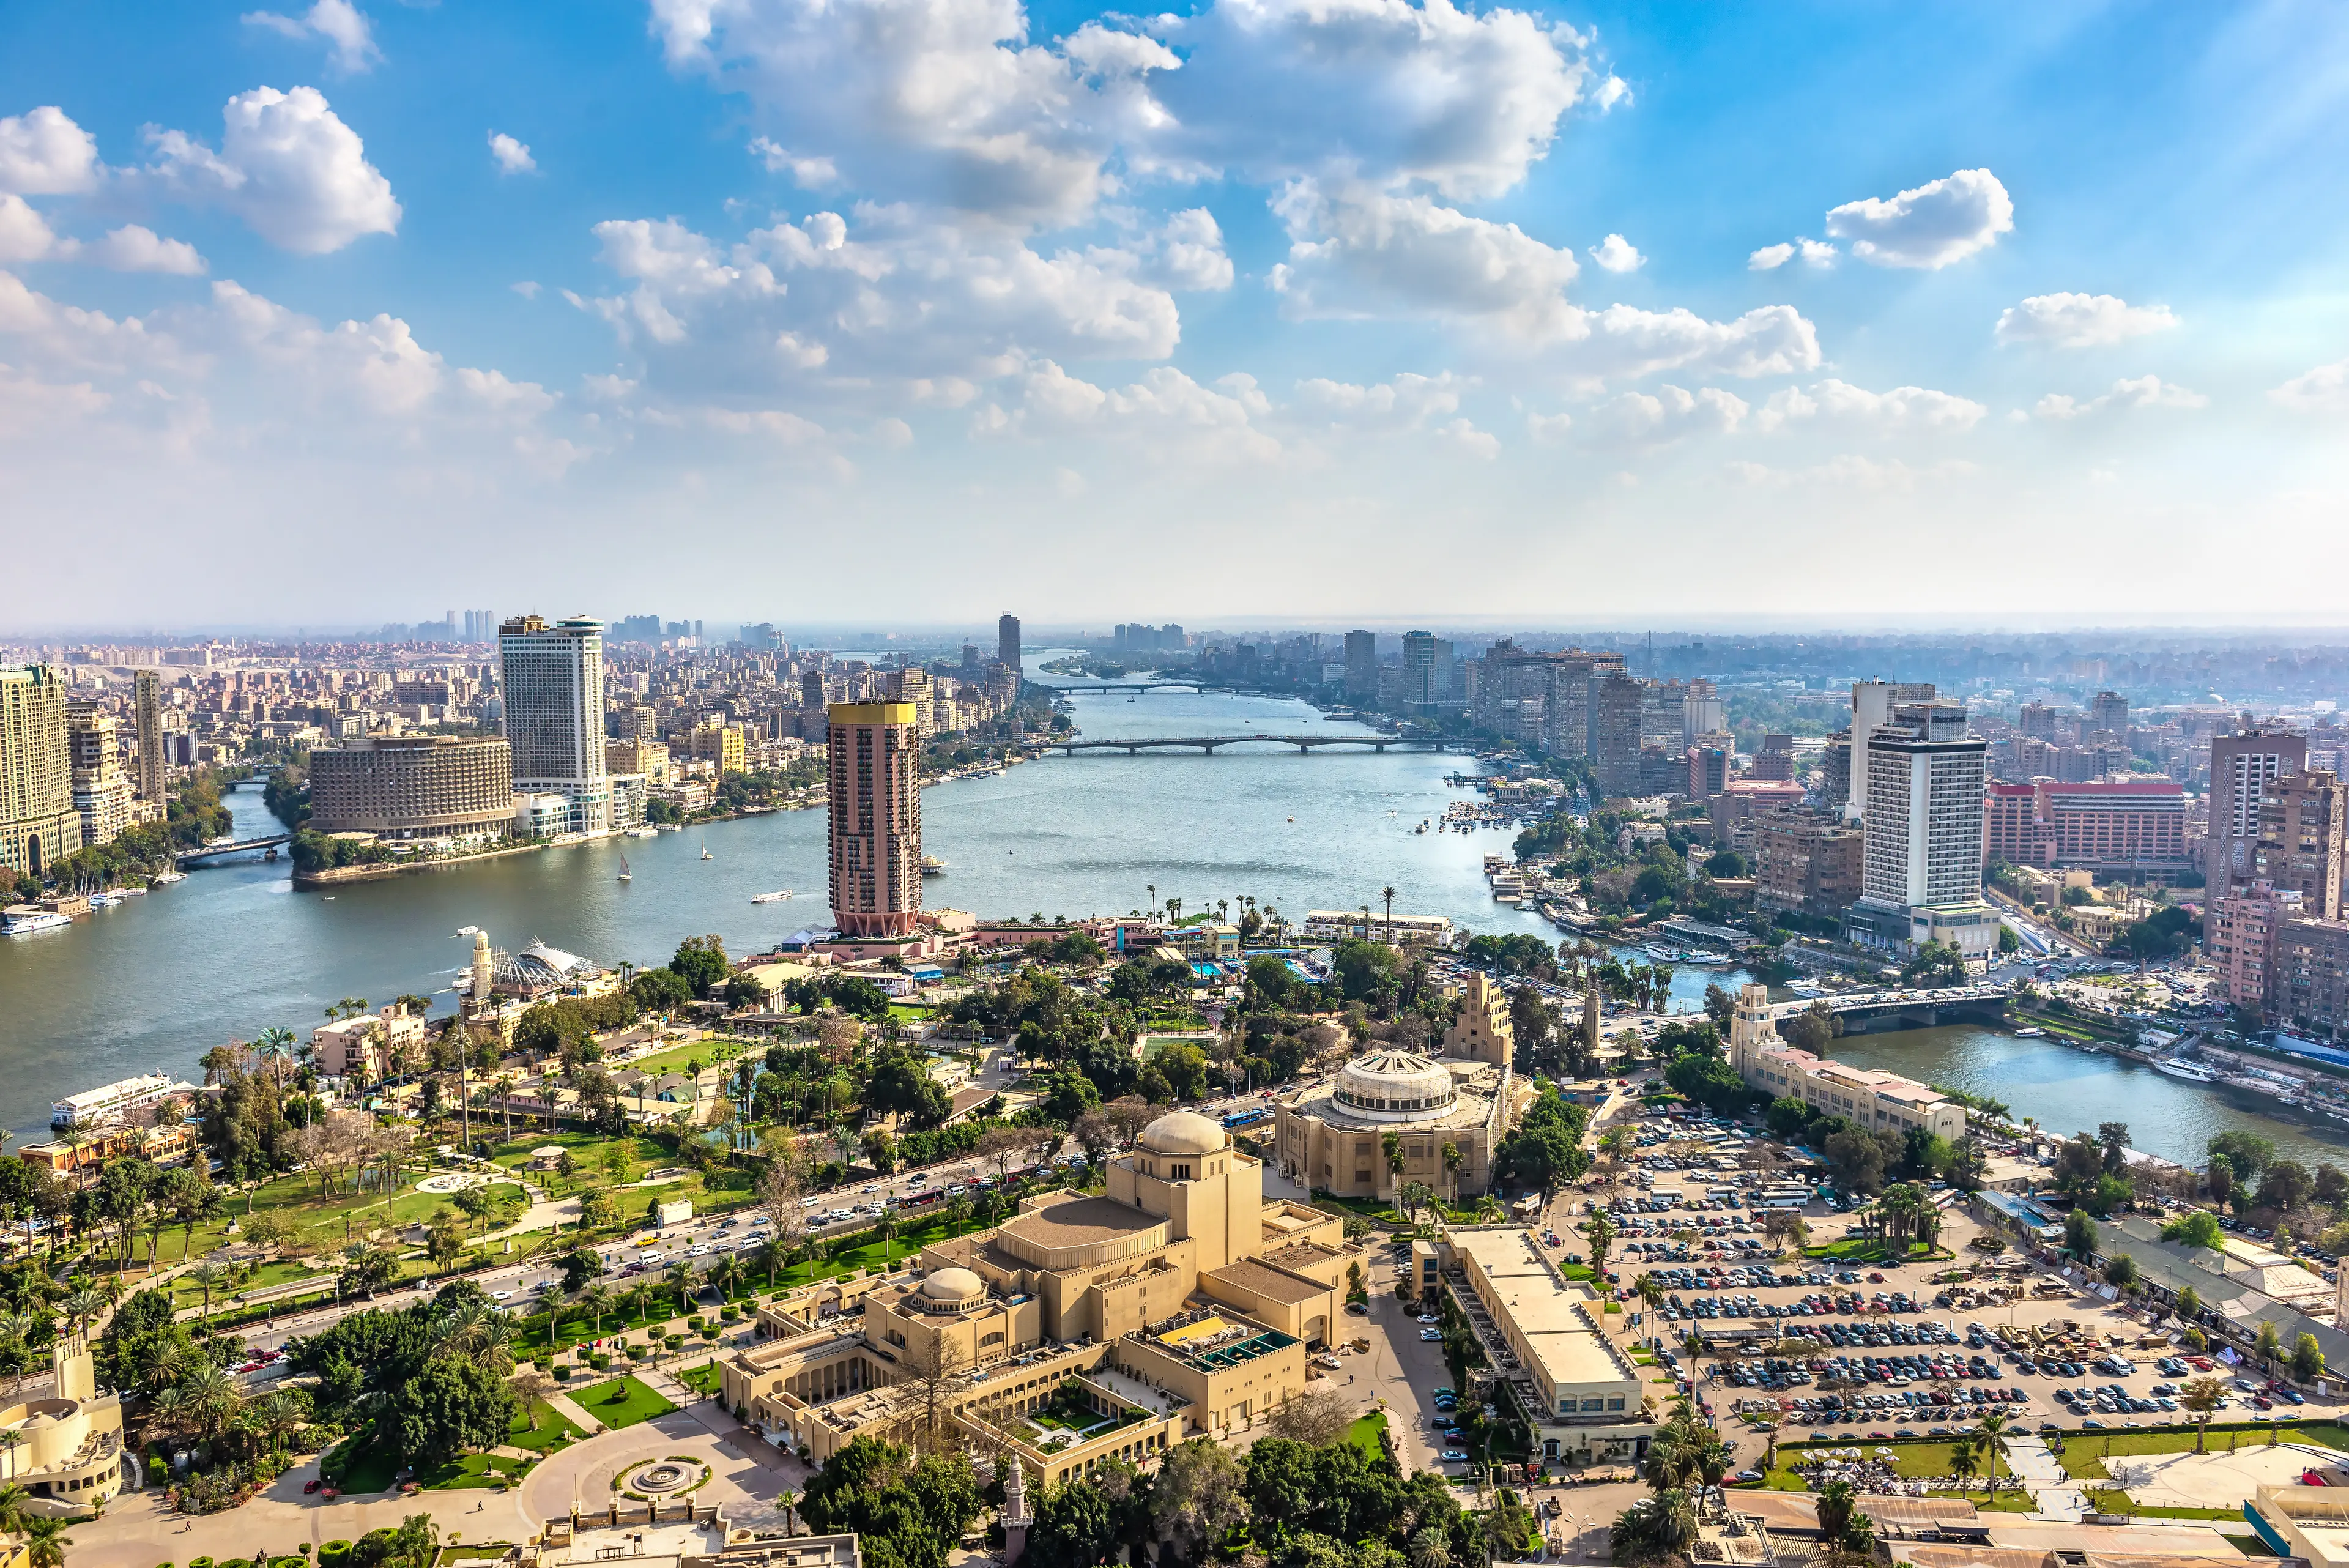 1-Day Family Relaxation & Sightseeing Itinerary for Cairo Locals